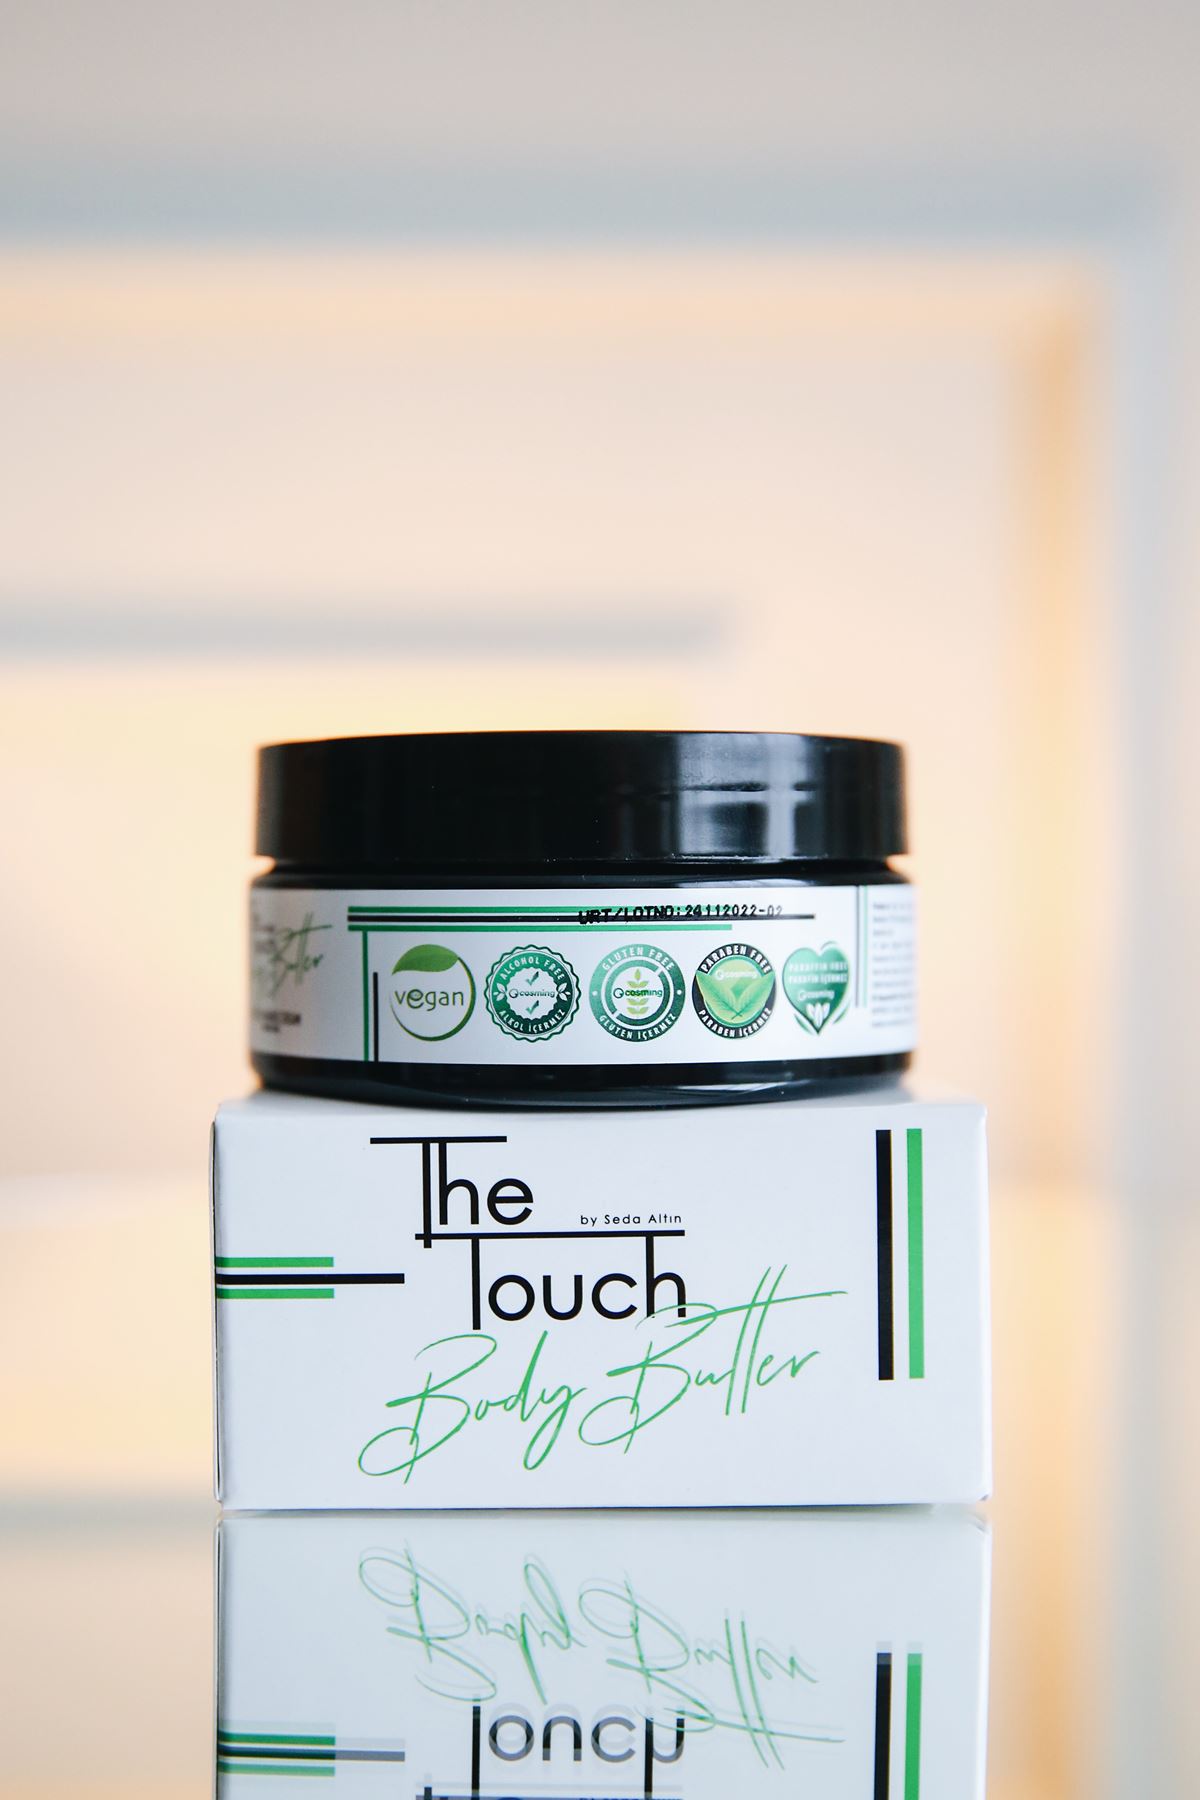 THE TOUCH STRETCH MARKS CREAM